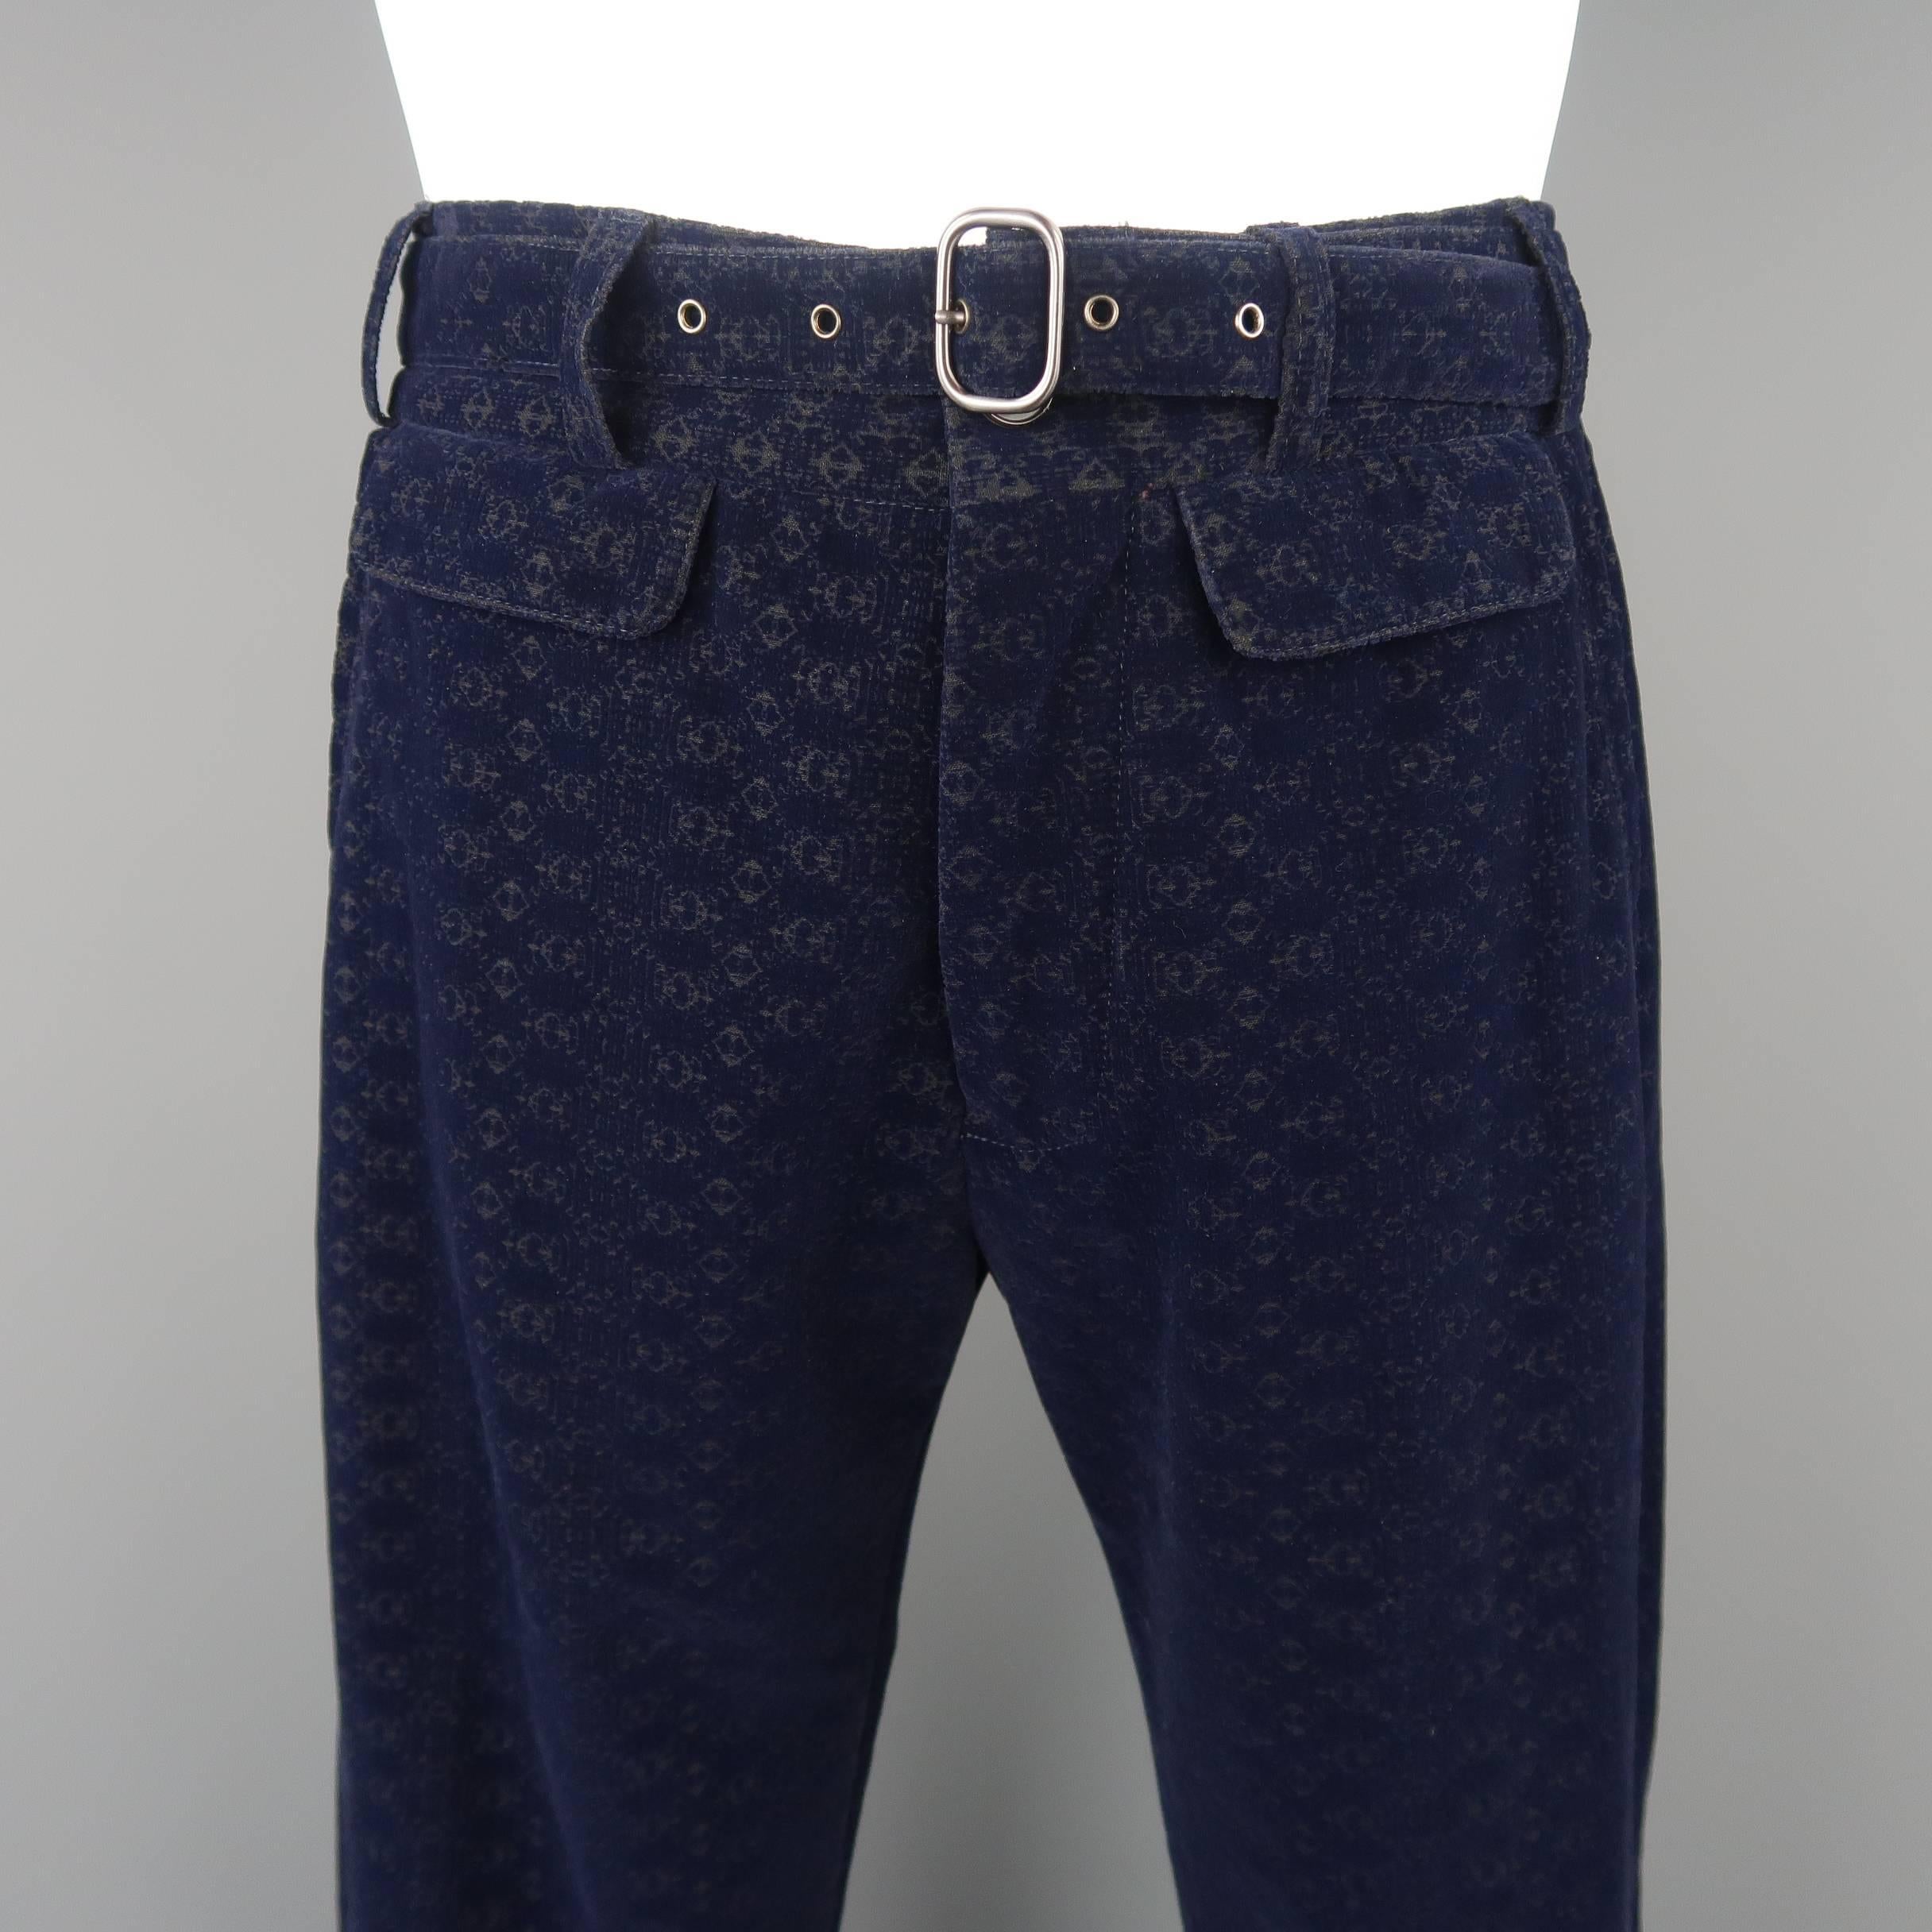 ROBERTO CAVALLI dress pants come in a navy blue velvet with all over print and features slated and double flap pockets and a belted waistband. Made in Italy.
 
Good Pre-Owned Condition.
Marked: IT 48
 
Measurements:
 
Waist: 32.5 in.
Rise:  10